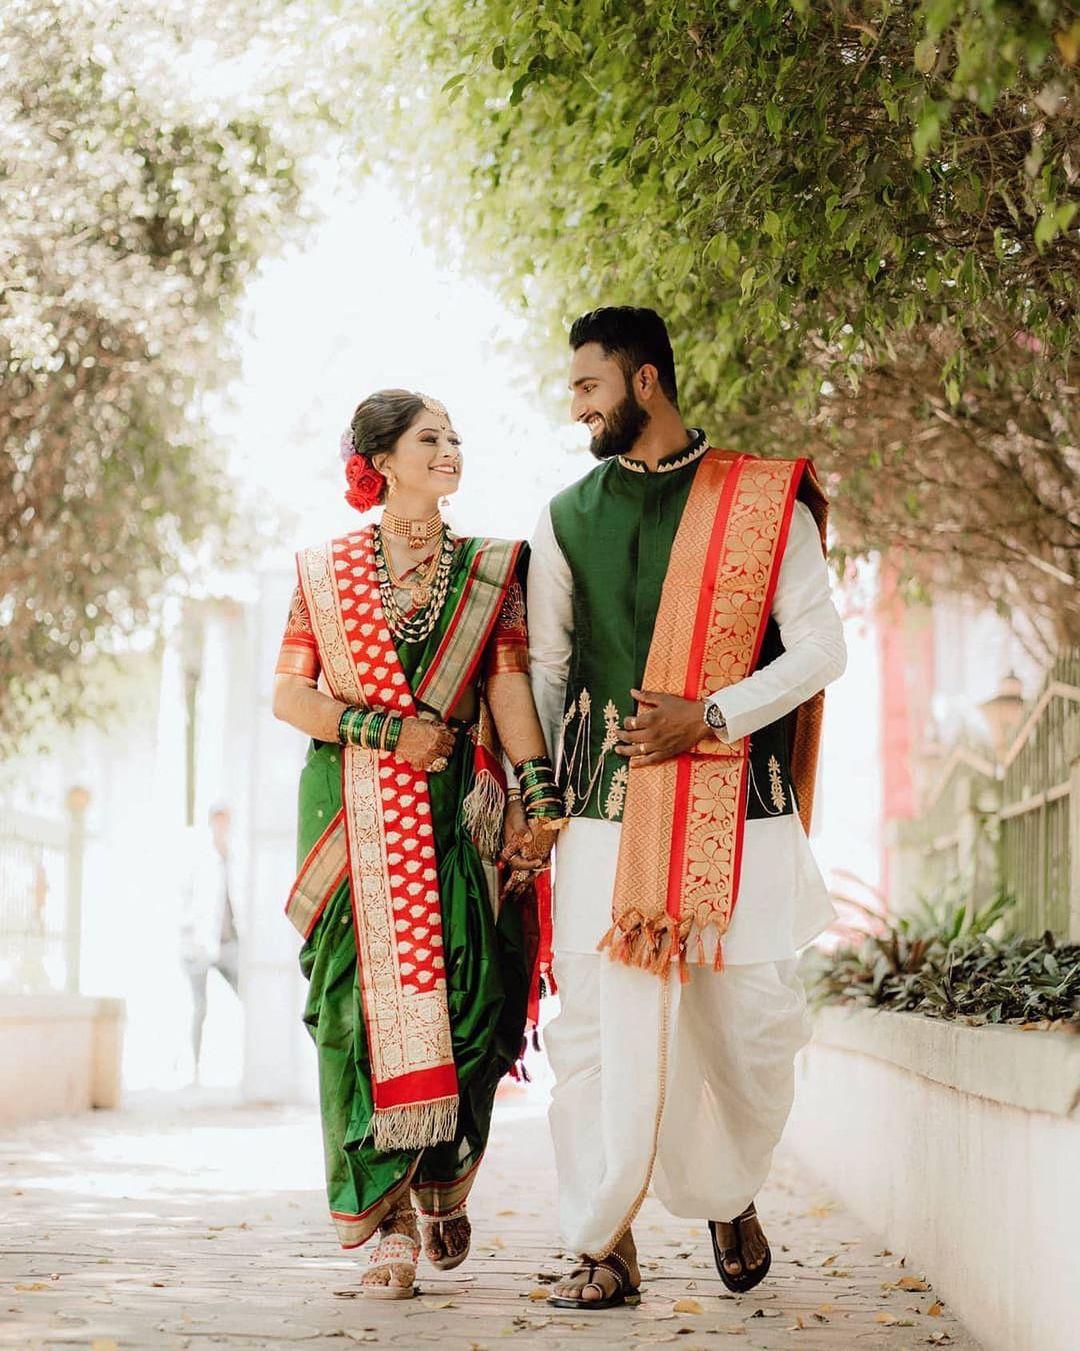 Portrait of Newlywed Couple in Traditional Clothing · Free Stock Photo